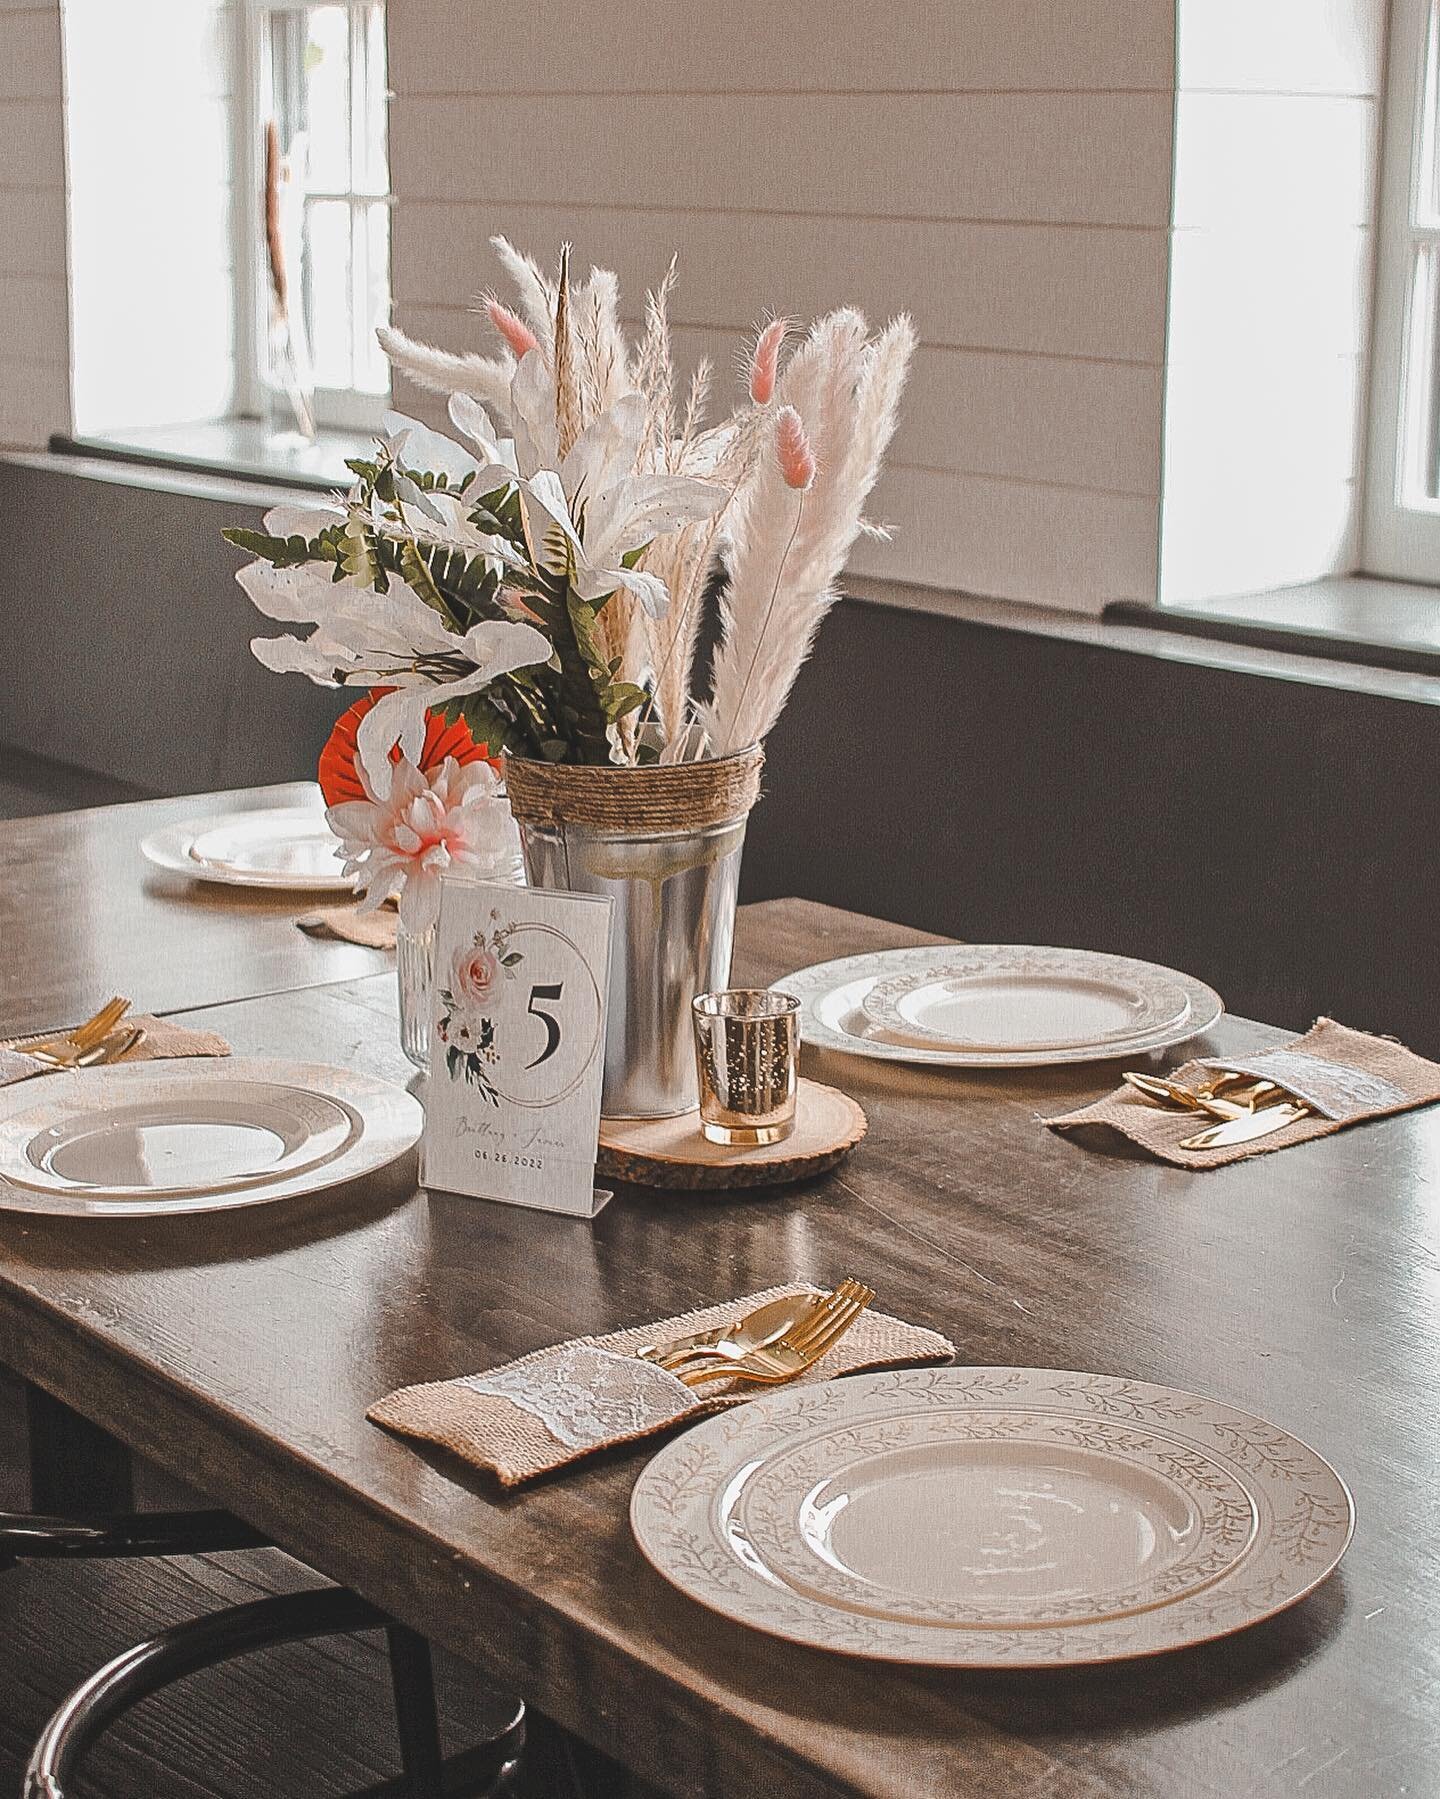 Our Fells Point Location has a GORGEOUS dining room fit for ANY occasion ✨ Baby Showers, wedding events, birthdays and more&hellip; We are so excited to share your special day with you ✨🥂🍸

All the info on booking in bio